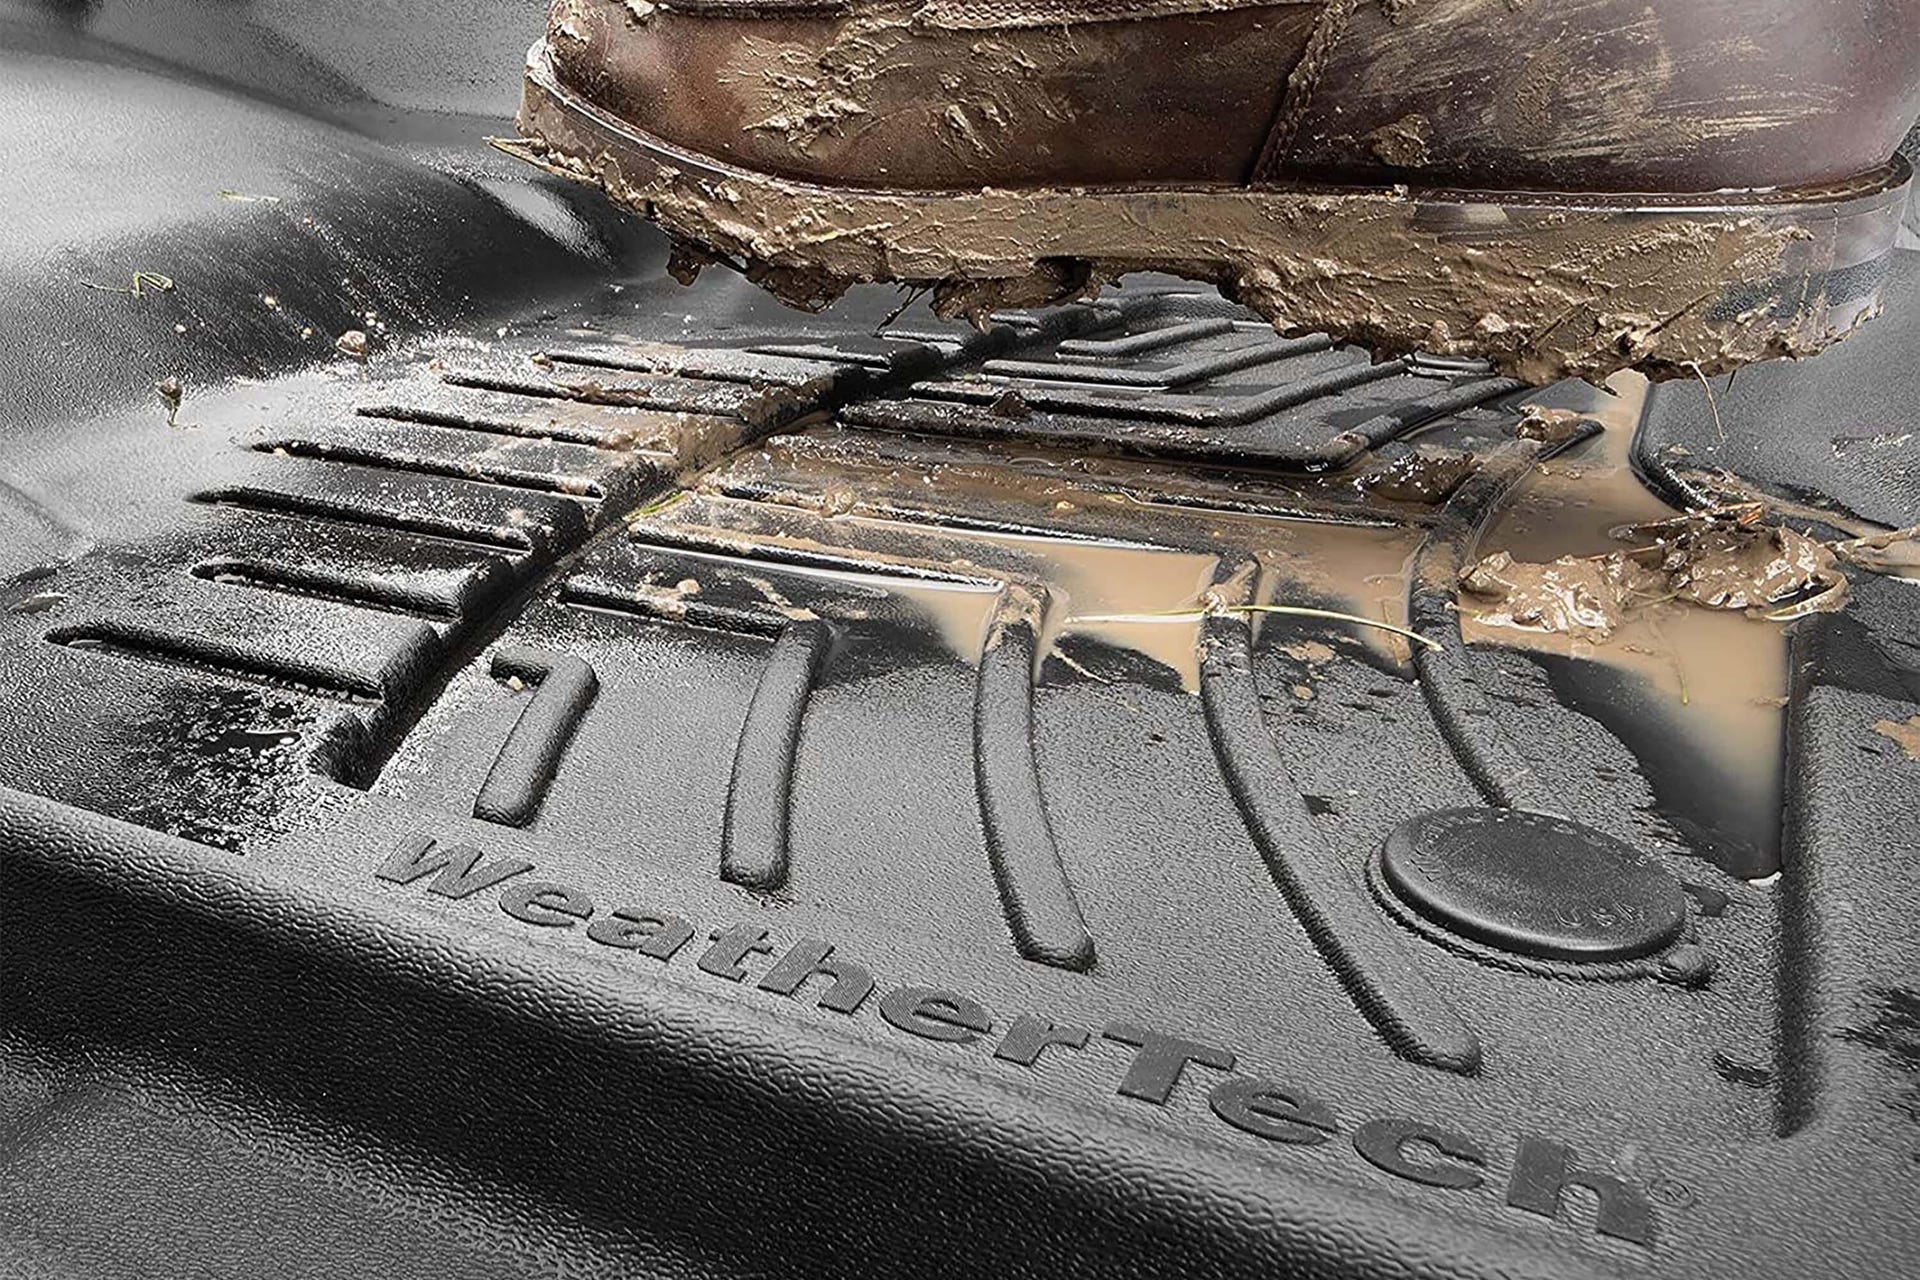 WeatherTech FloorLiner HP offer car interior protection from muddy water